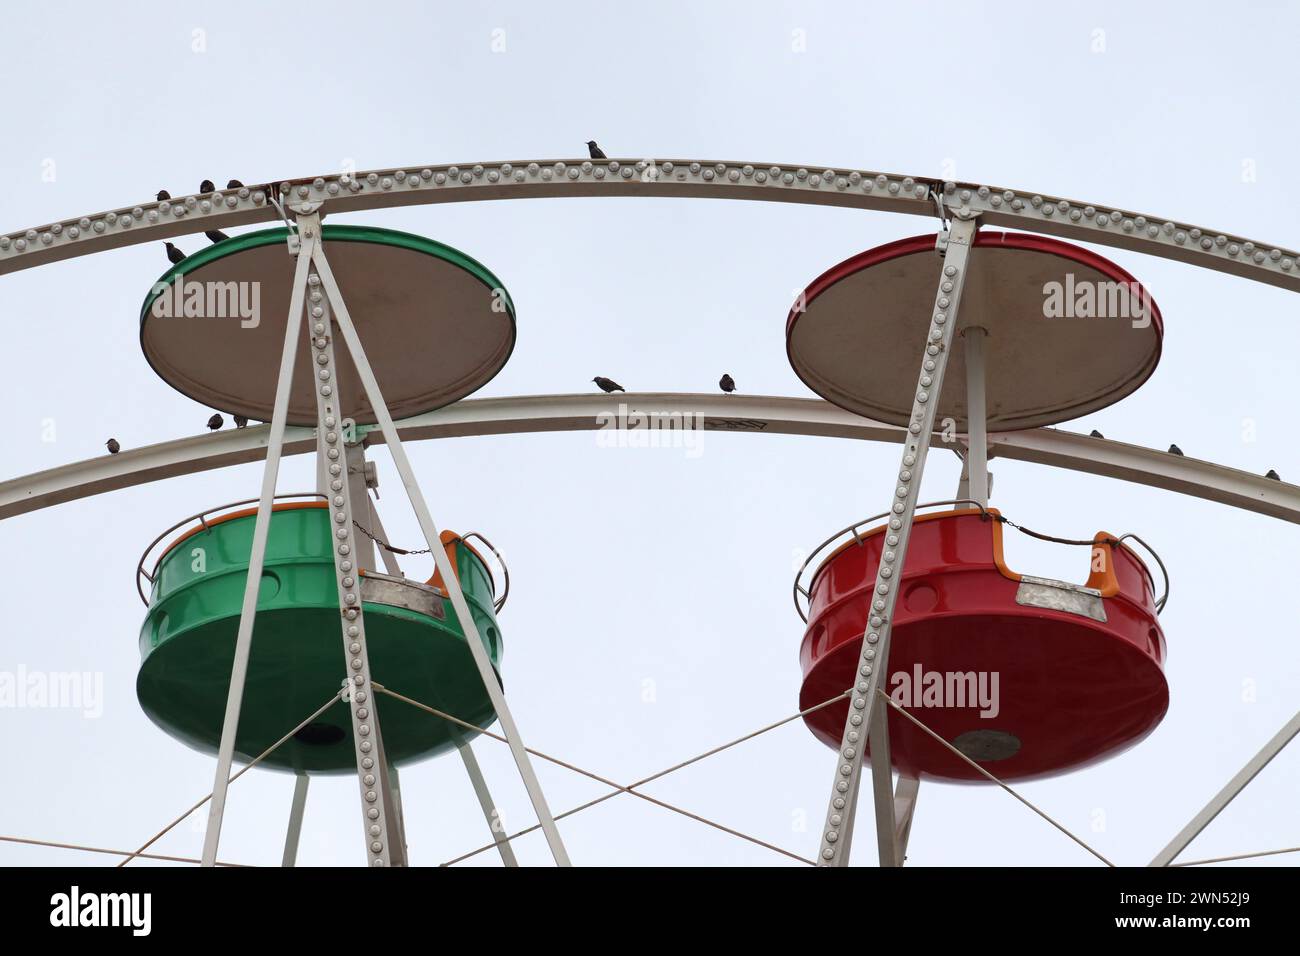 Aerial symphony. Two gondolas, green and red colors and birds in the ferris wheel amusement park. Stock Photo